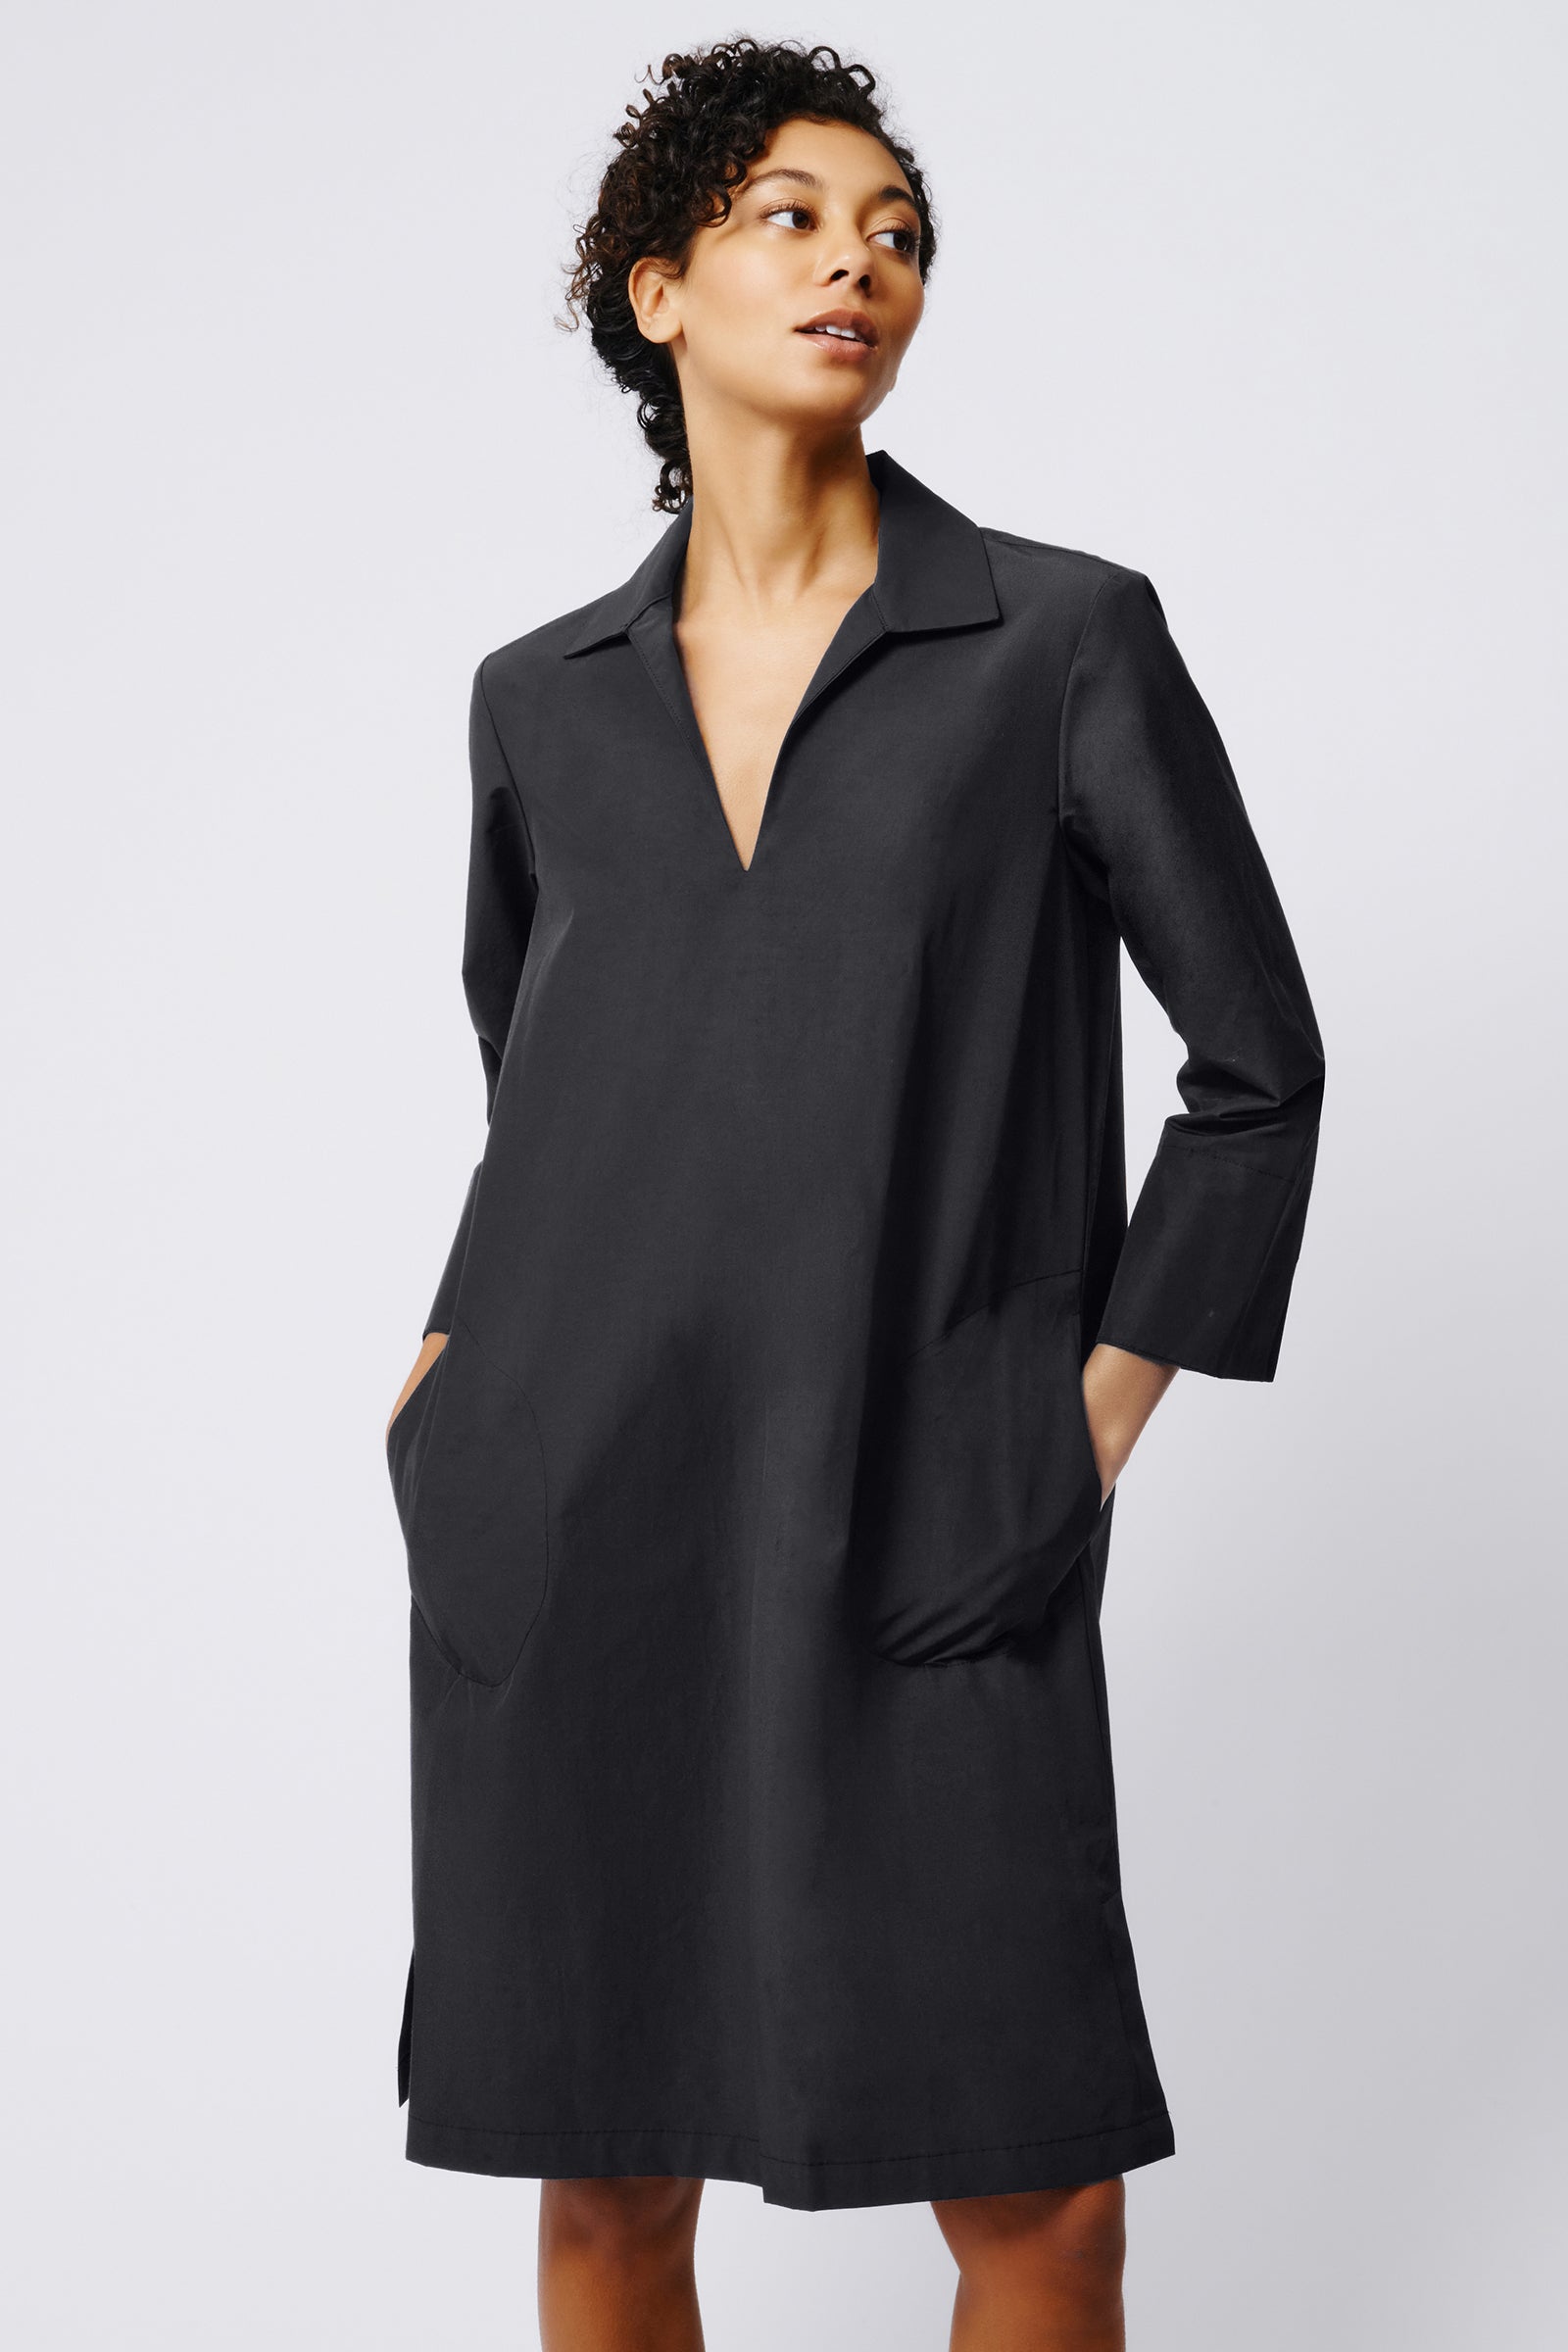 Kal Rieman Collared V Neck Dress in Black Broadcloth on Model Front View Crop 4